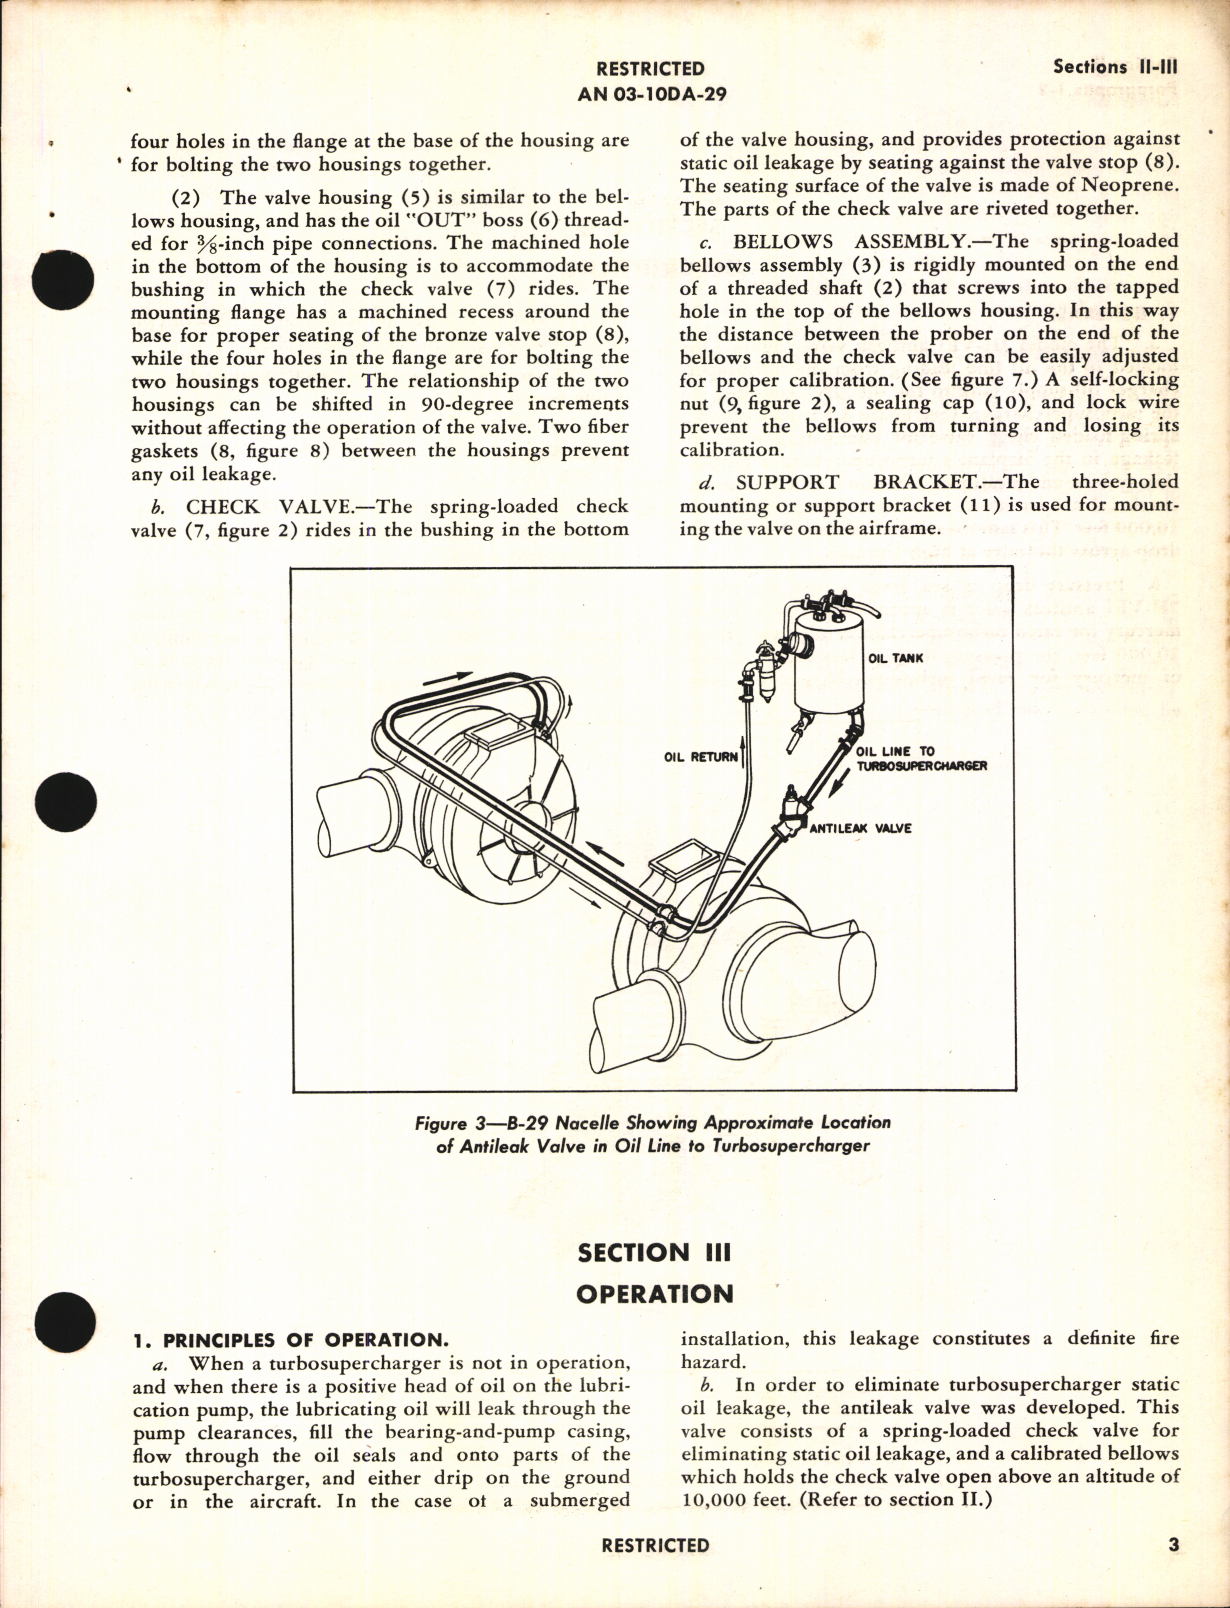 Sample page 7 from AirCorps Library document: Overhaul Instructions with Parts Catalog for Model 7H-VE1 Barometric Antileak Valve